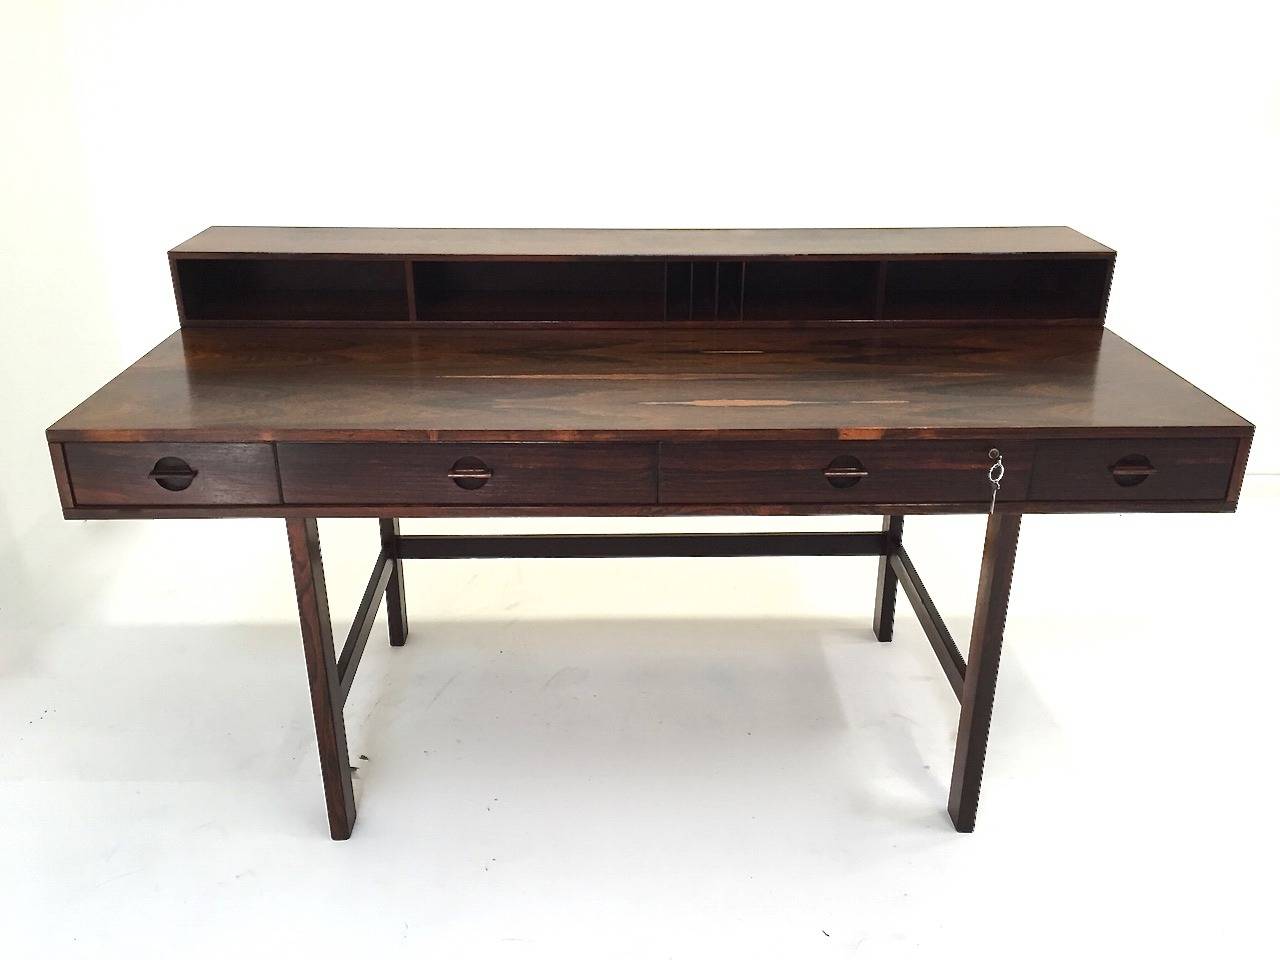 Rare rosewood Jens Quistgaard flip-top partner desk for Løvig. Good original condition with minor age appropriate wear as pictured. Dated 1968. Original keys are included.